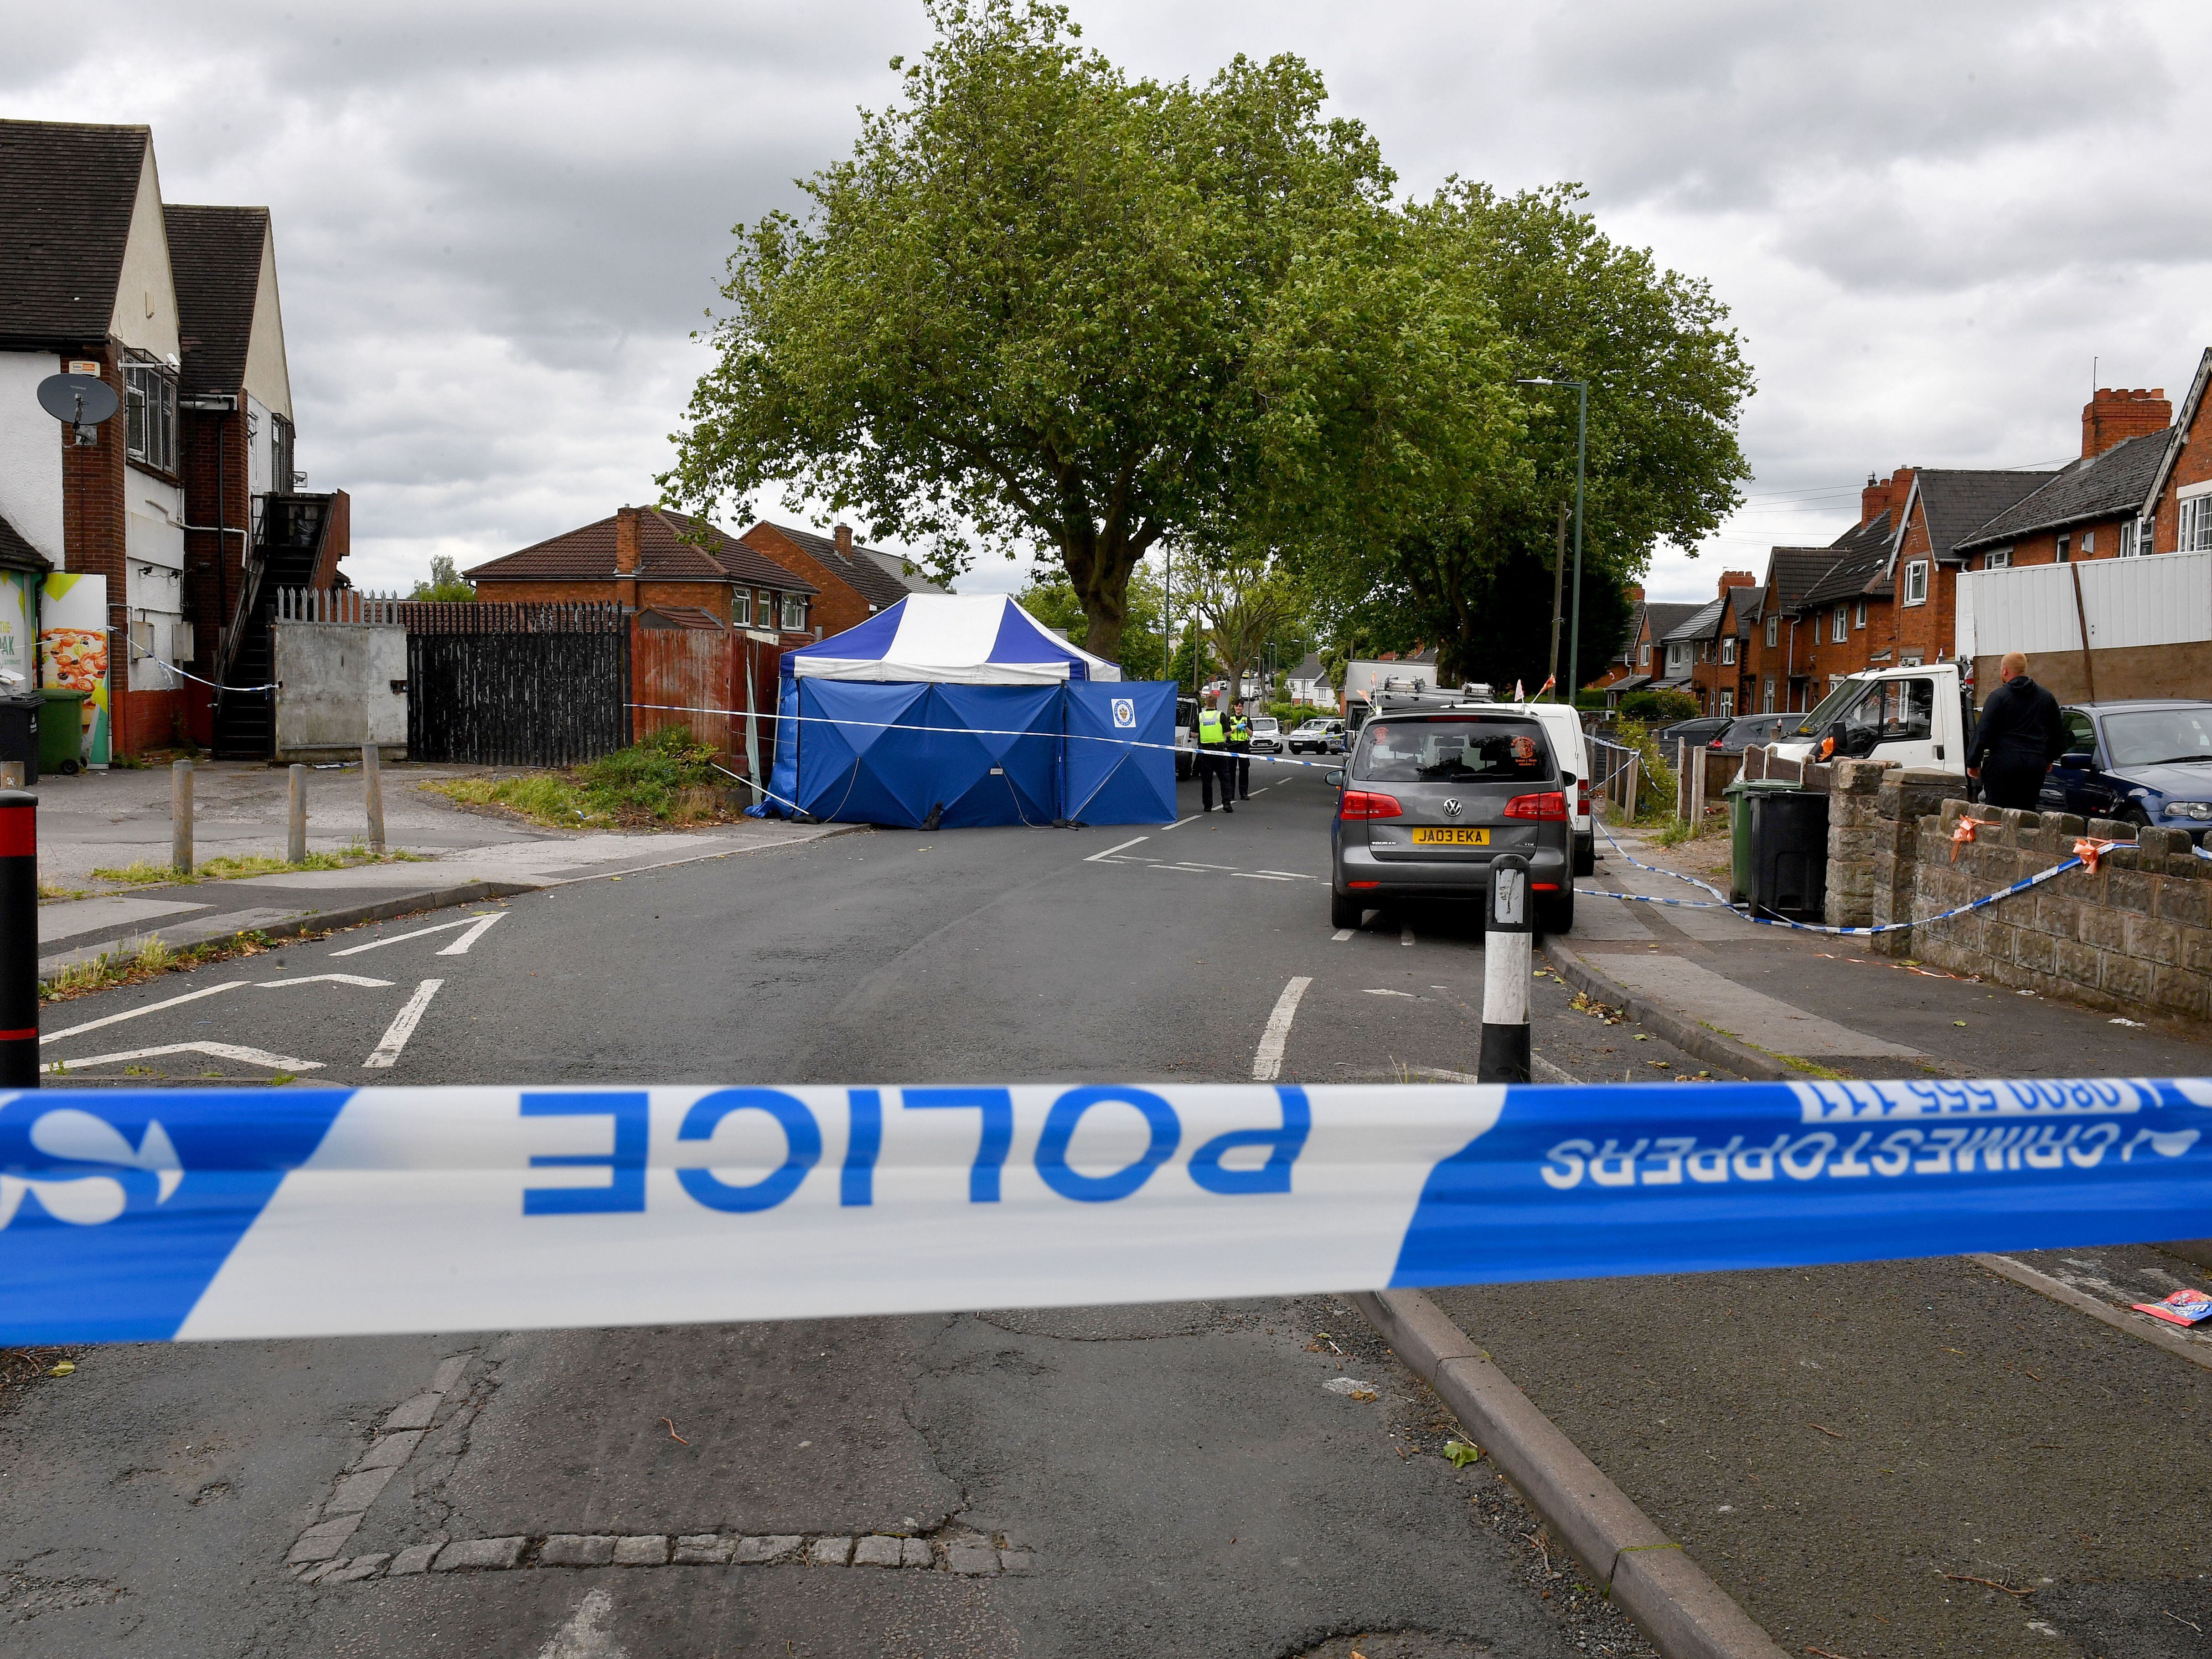 Community leaders call for peace following fatal shooting in Walsall